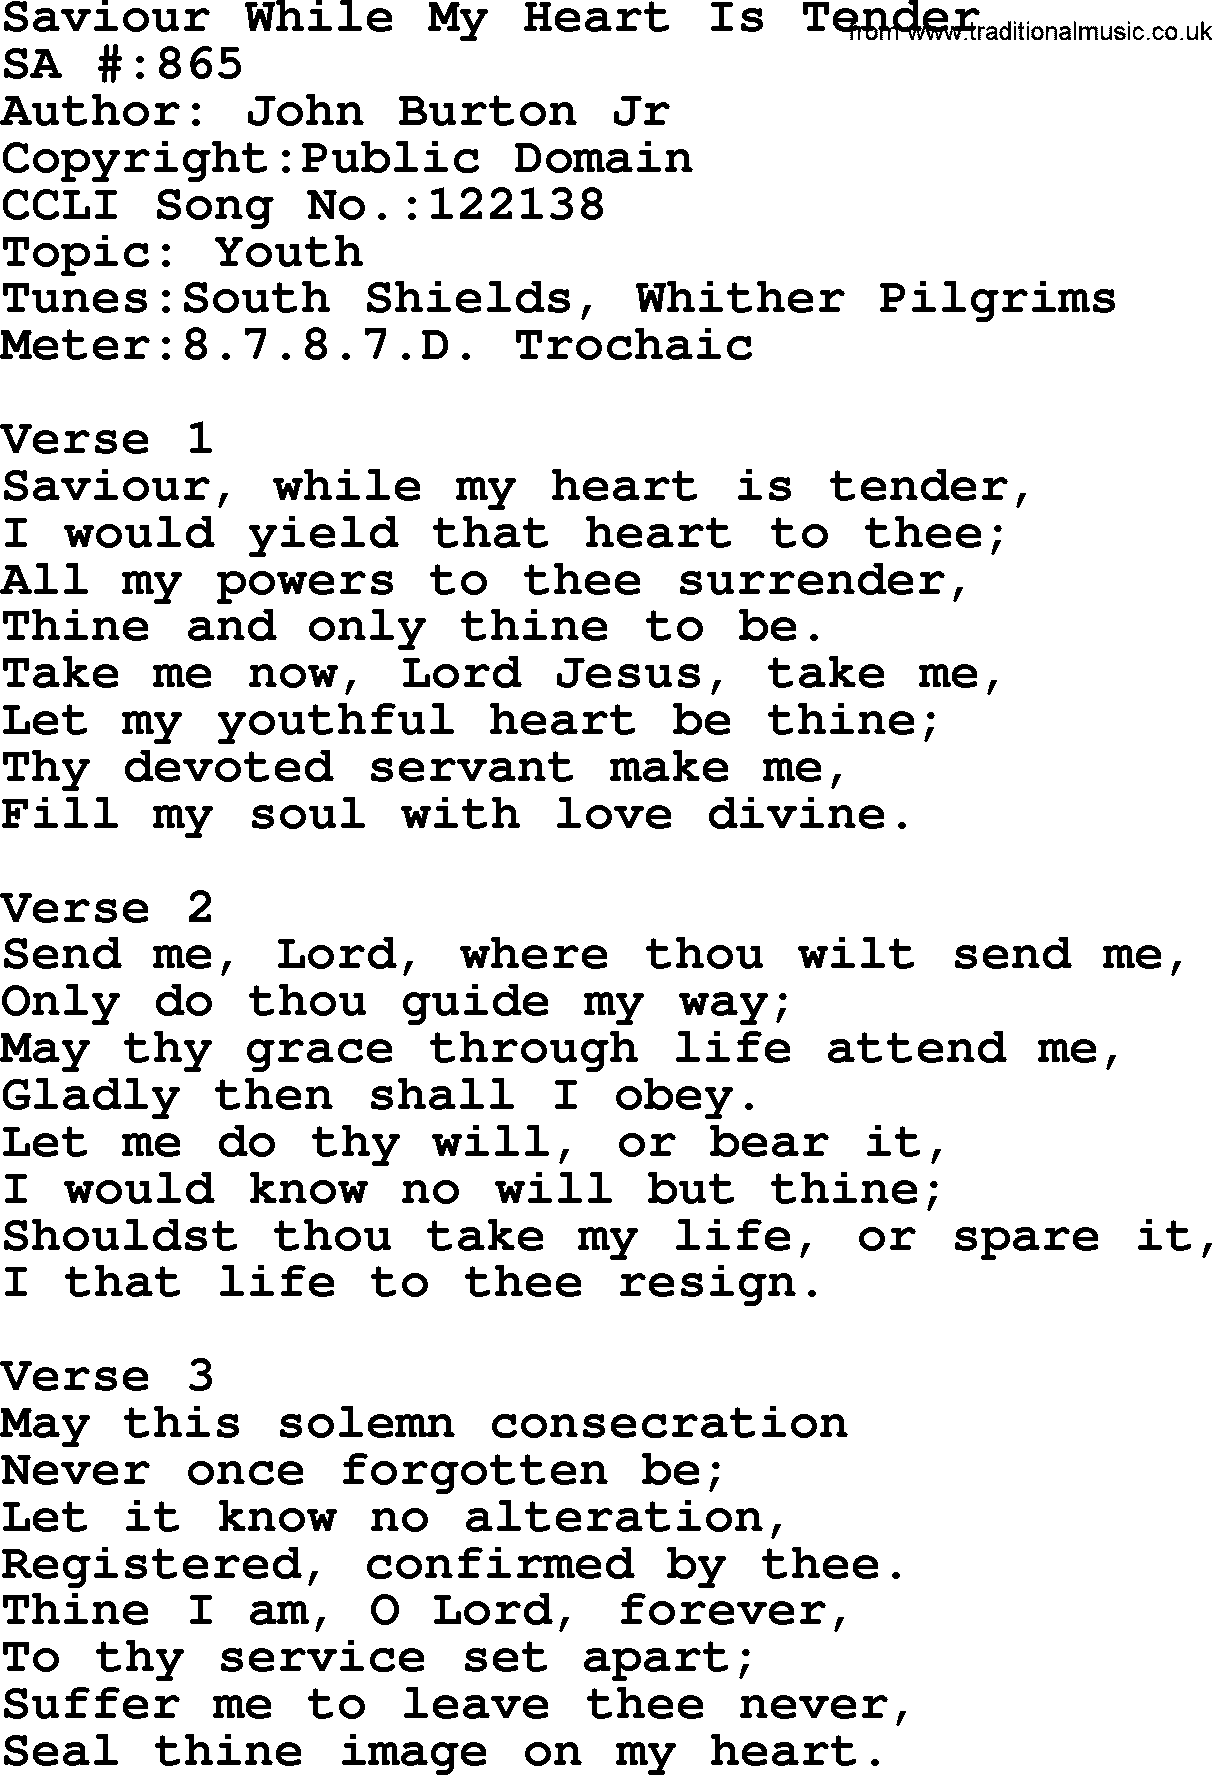 Salvation Army Hymnal, title: Saviour While My Heart Is Tender, with lyrics and PDF,